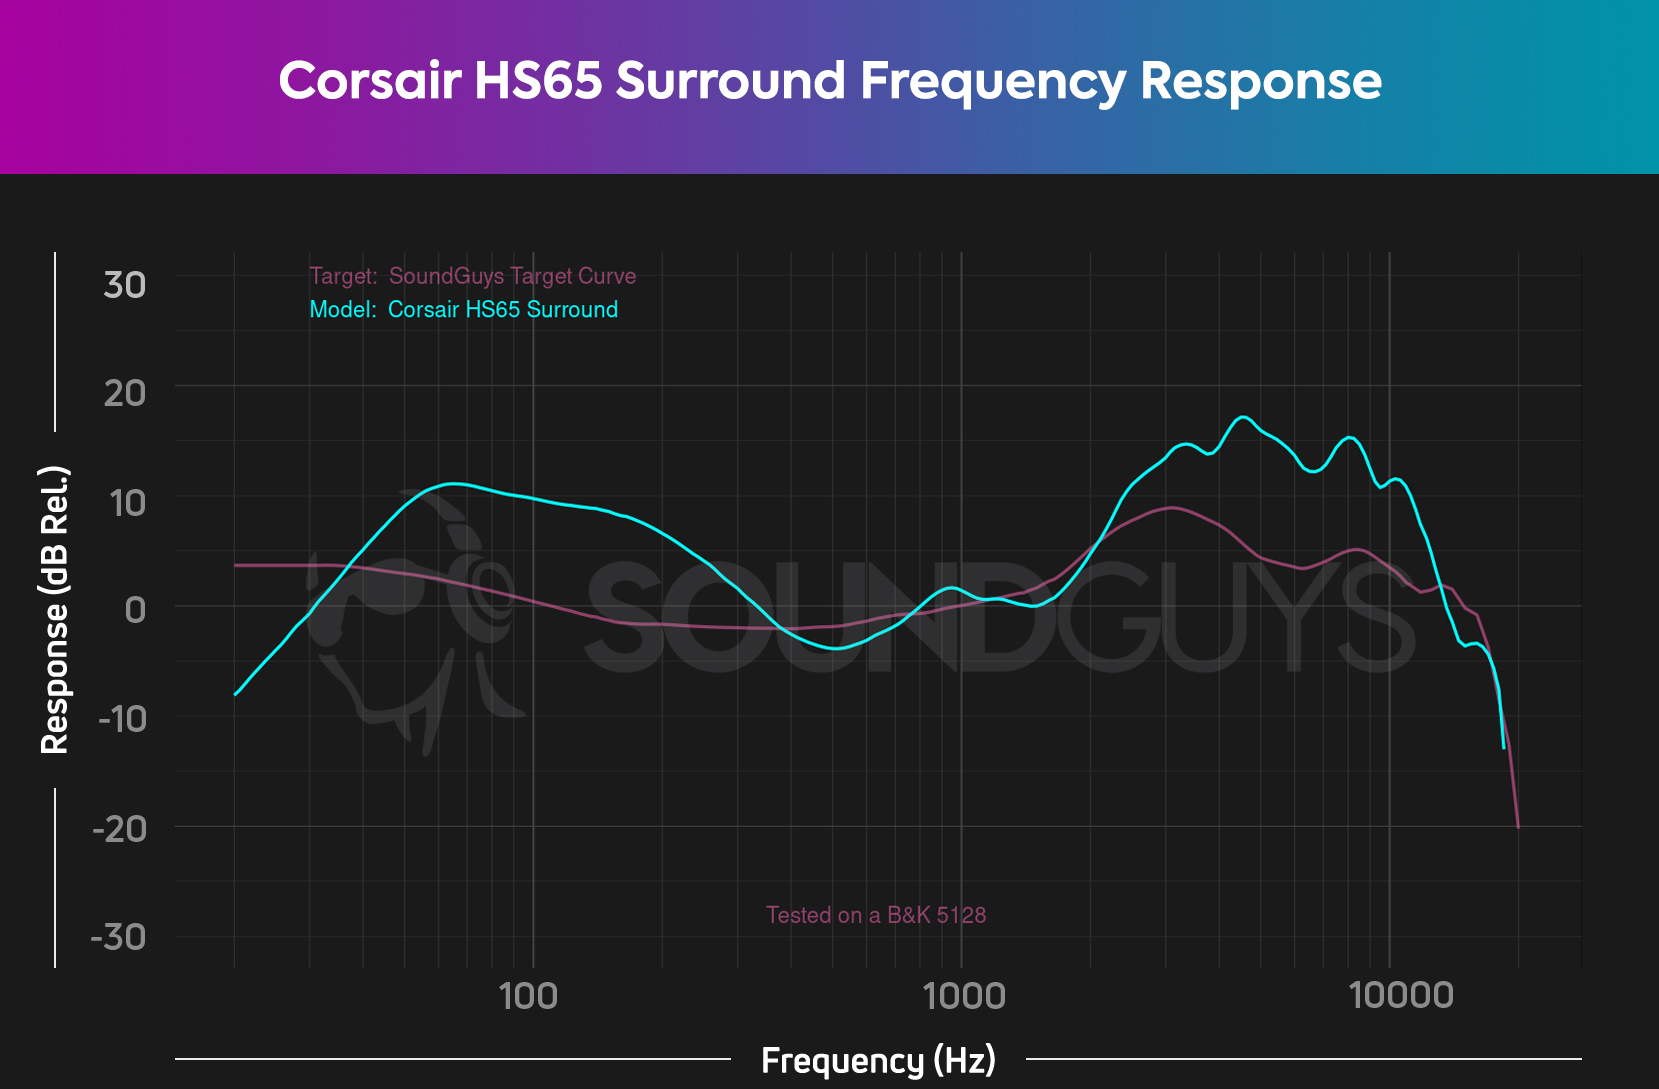 The frequency response chart for the Corsair HS65 Surround, showing a large boost in the bass frequencies and high frequencies.